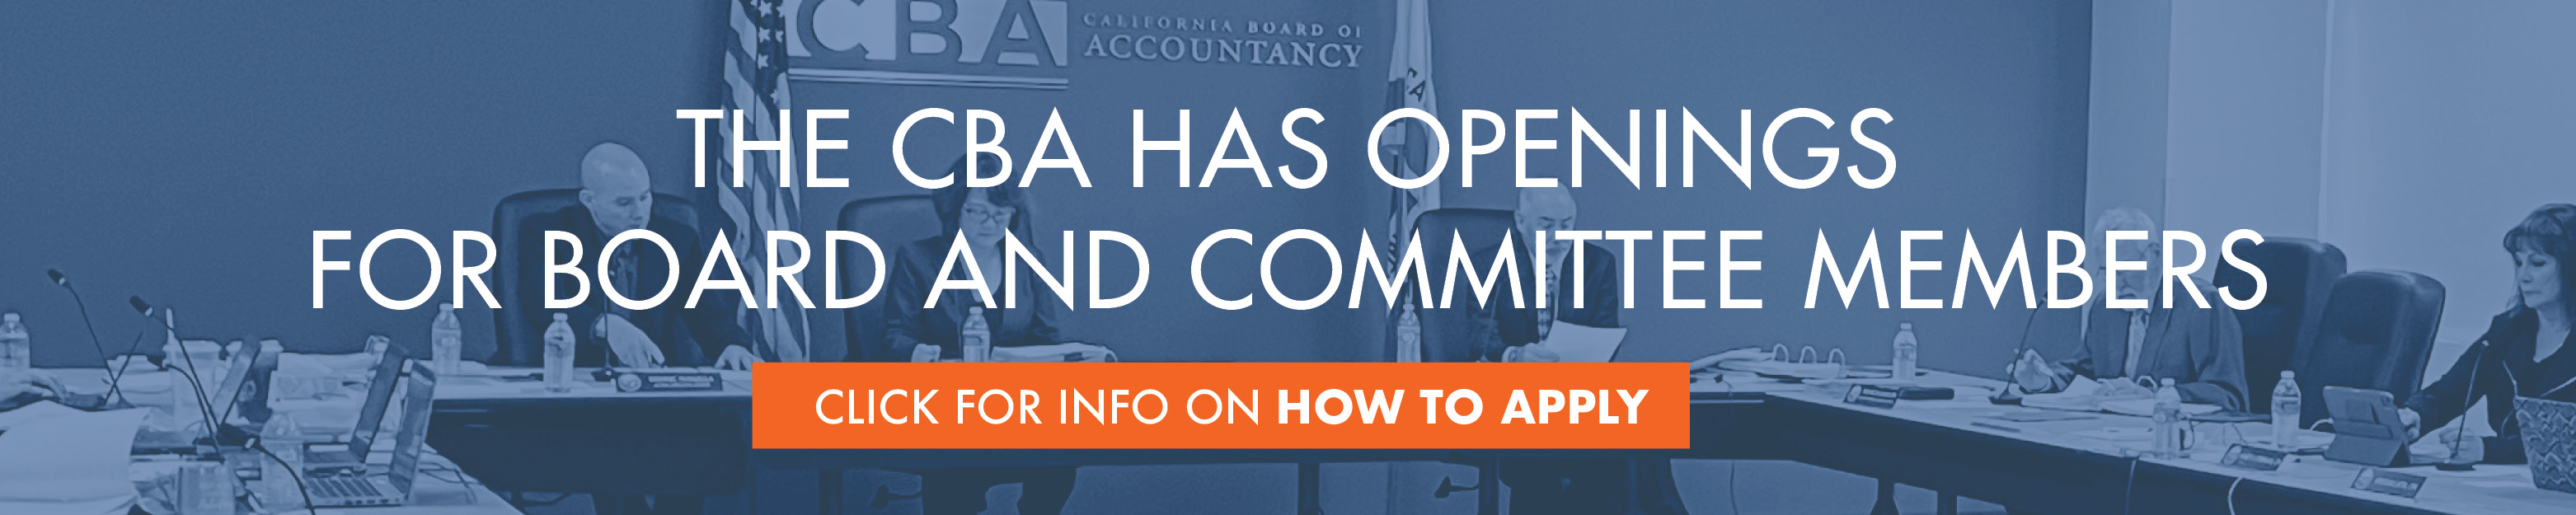 The CBA has openings for Board and Committee Members